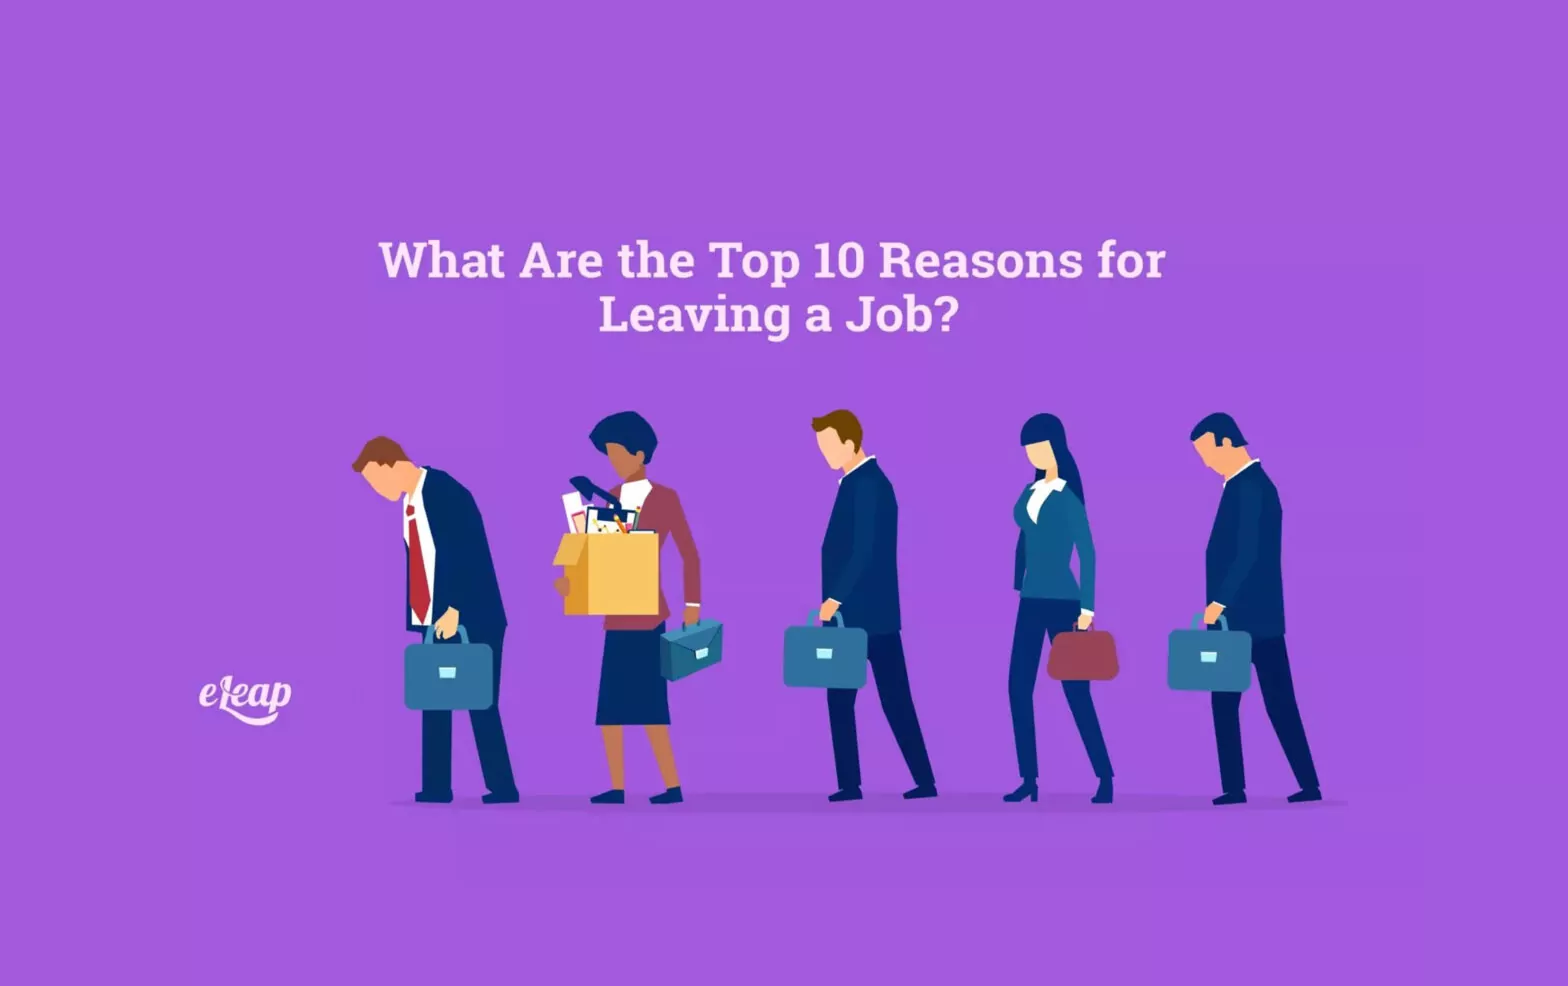 What Are the Top 10 Reasons for Leaving a Job?